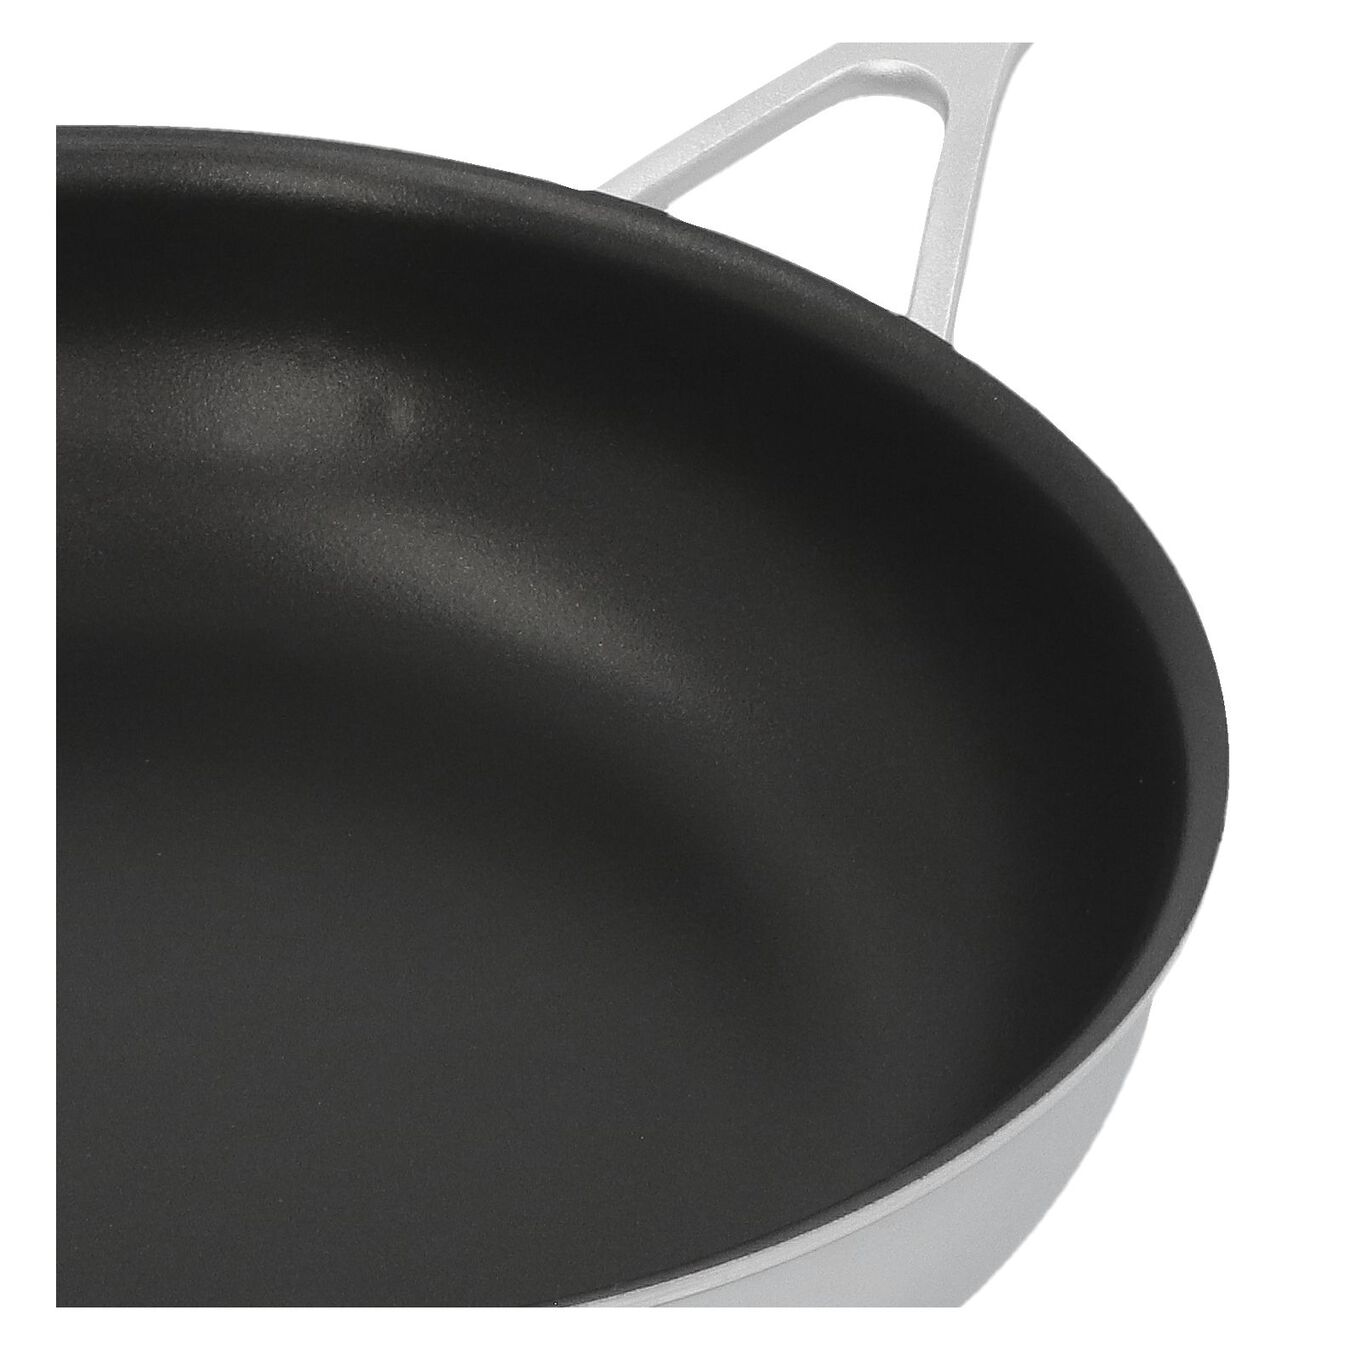 9.5-inch, 18/10 Stainless Steel, PTFE, Traditional Nonstick Fry Pan,,large 2